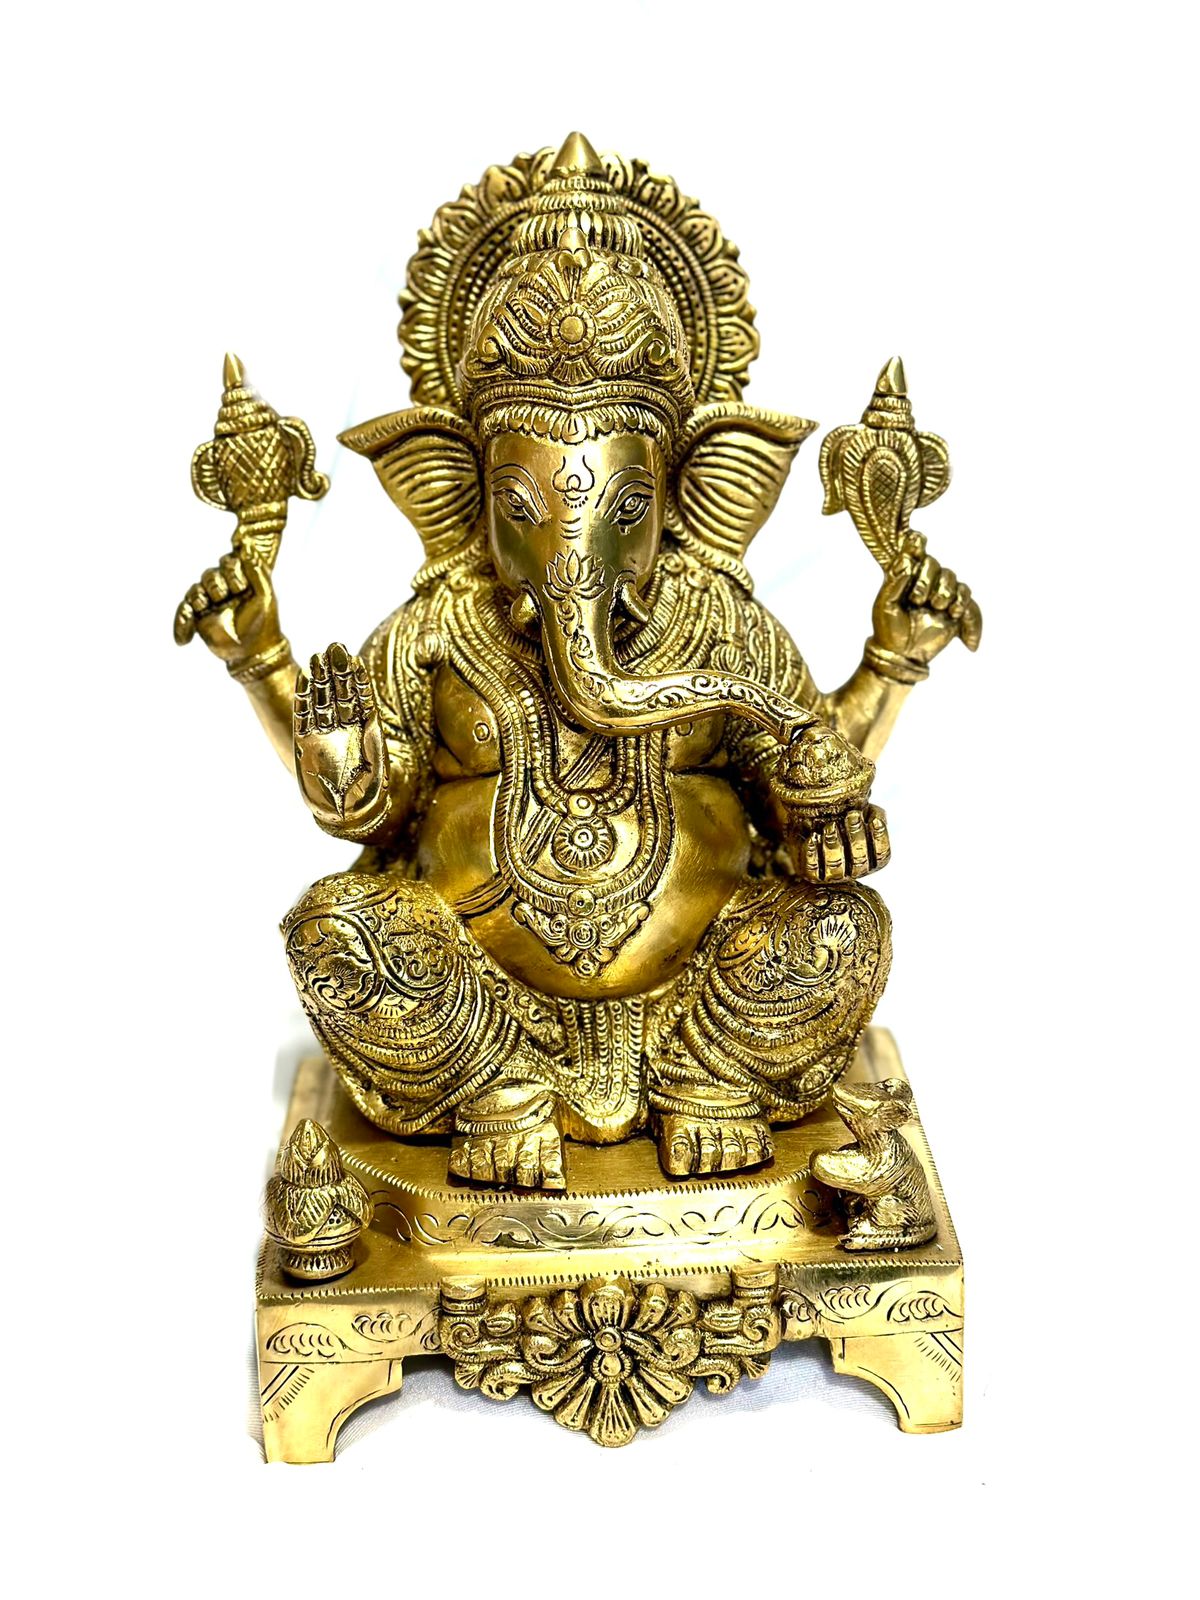 Brass Ganesha In Lal Bagh Raja Style Handcrafted From Brass By Tamrapatra